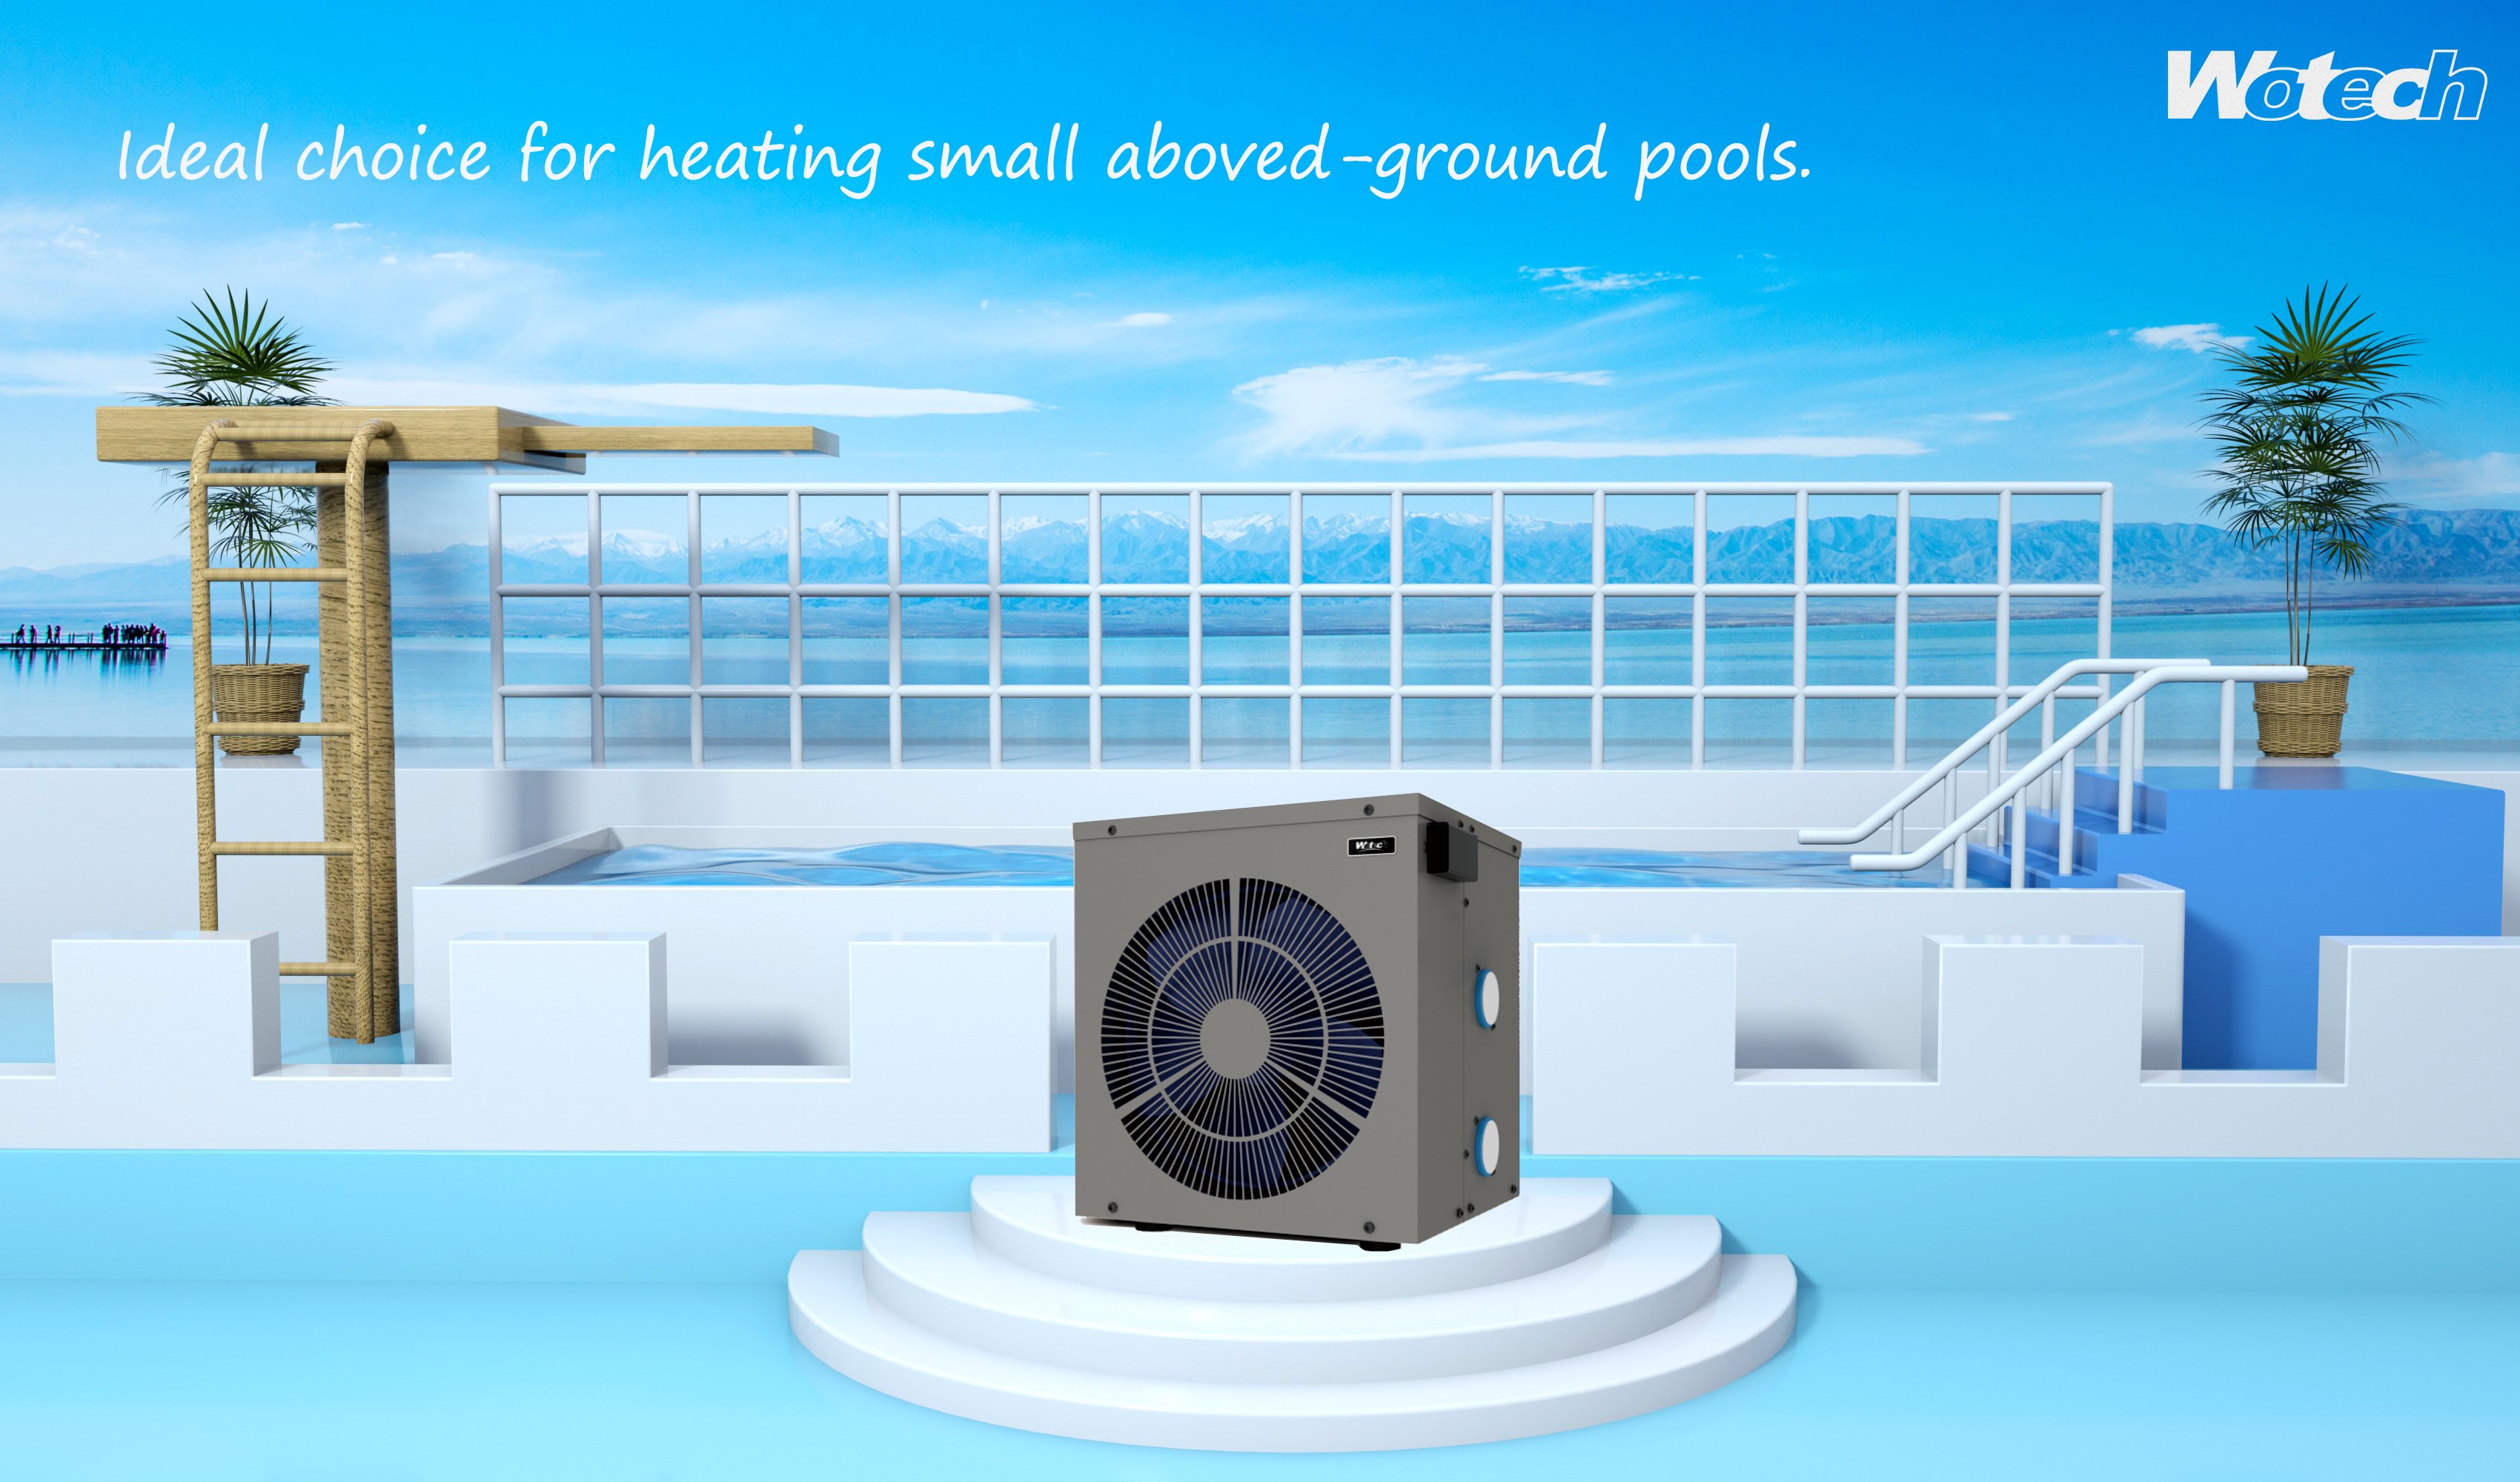 Ideal Choice for heating small aboved-ground pools